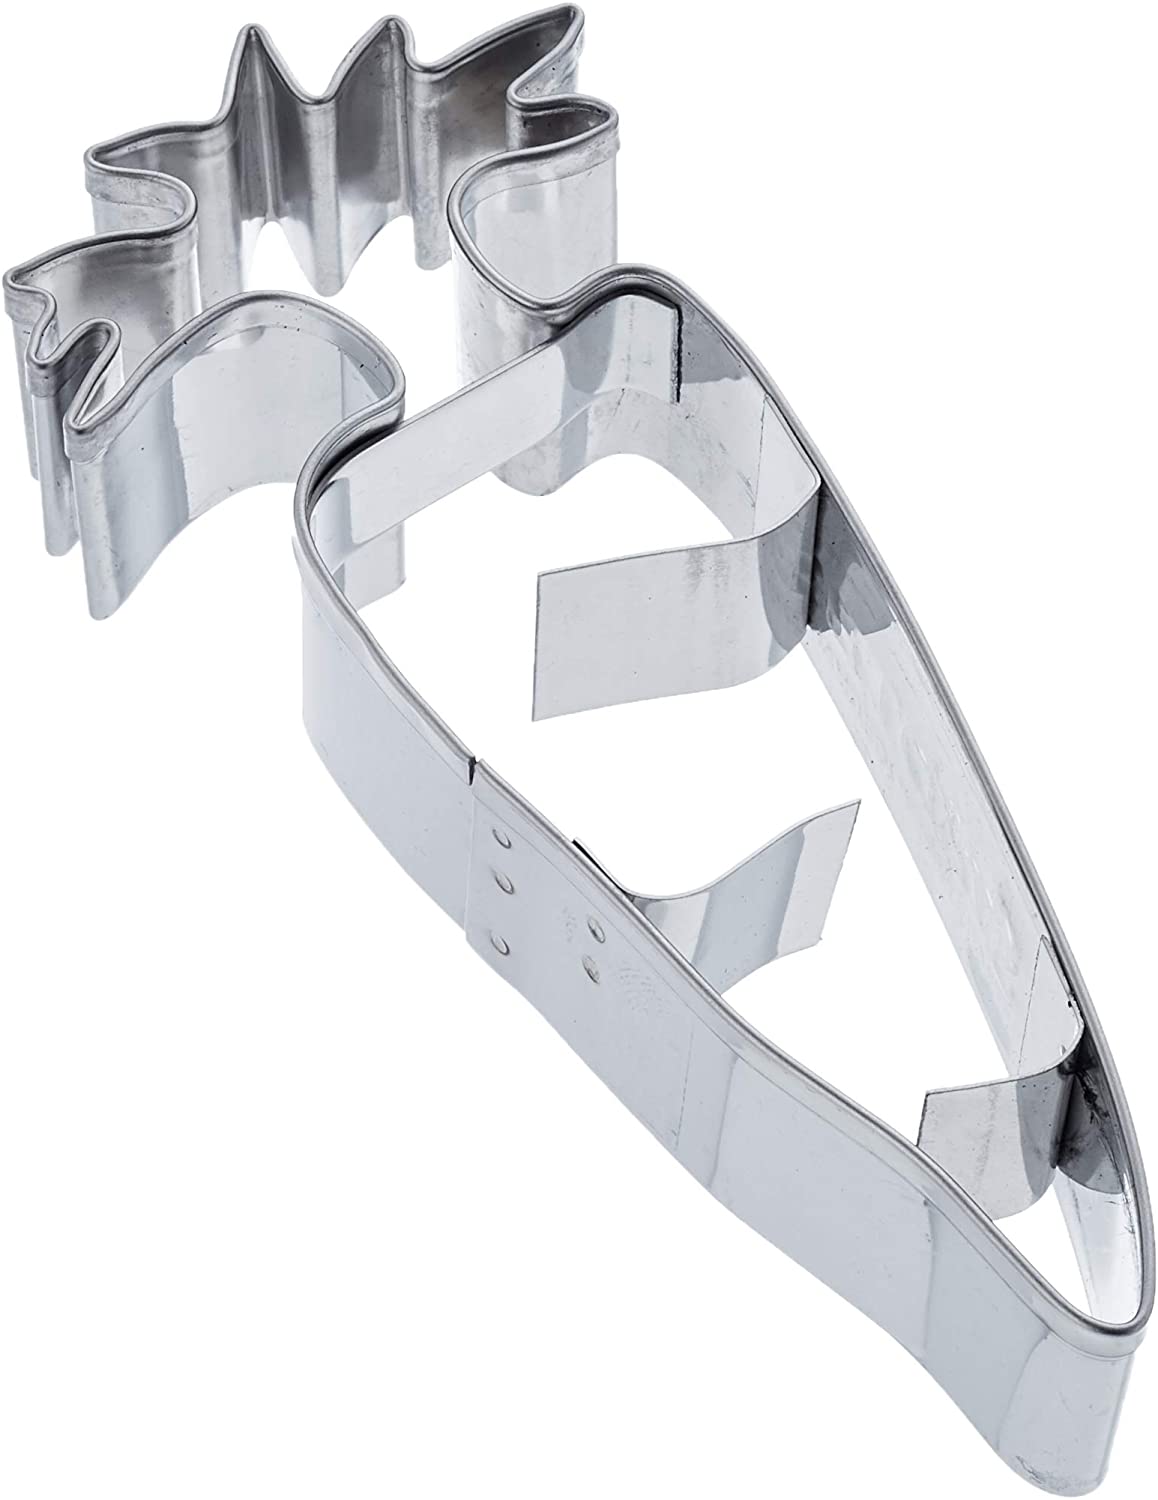 Staedter Städter Cookie Cutters Stainless Steel 9 CM Carrot